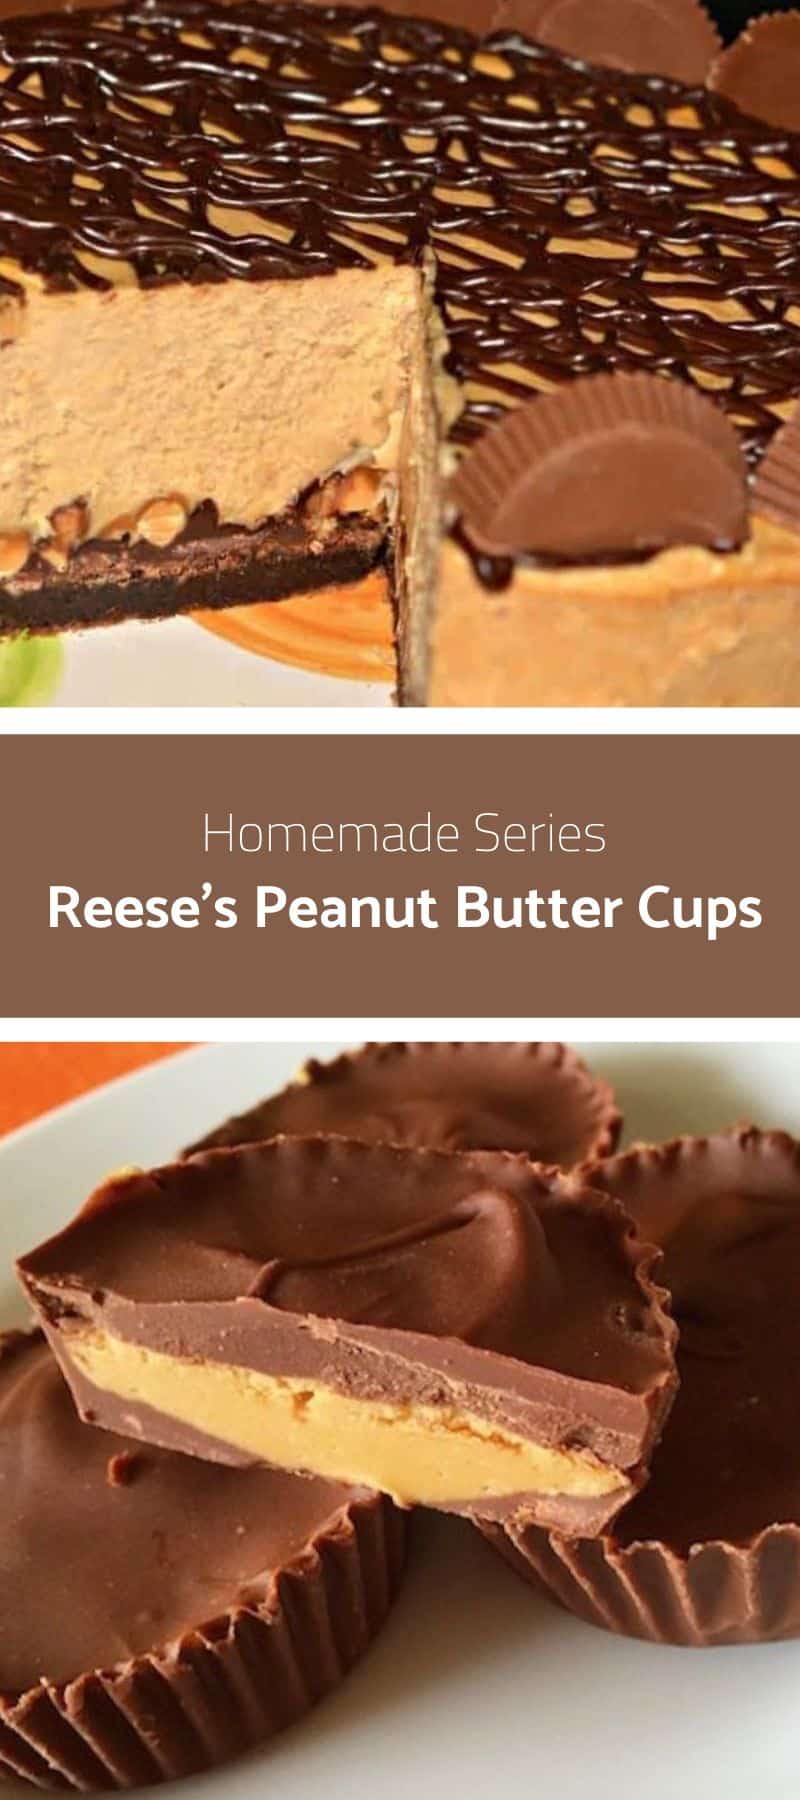 Reese's Peanut Butter Cups 3